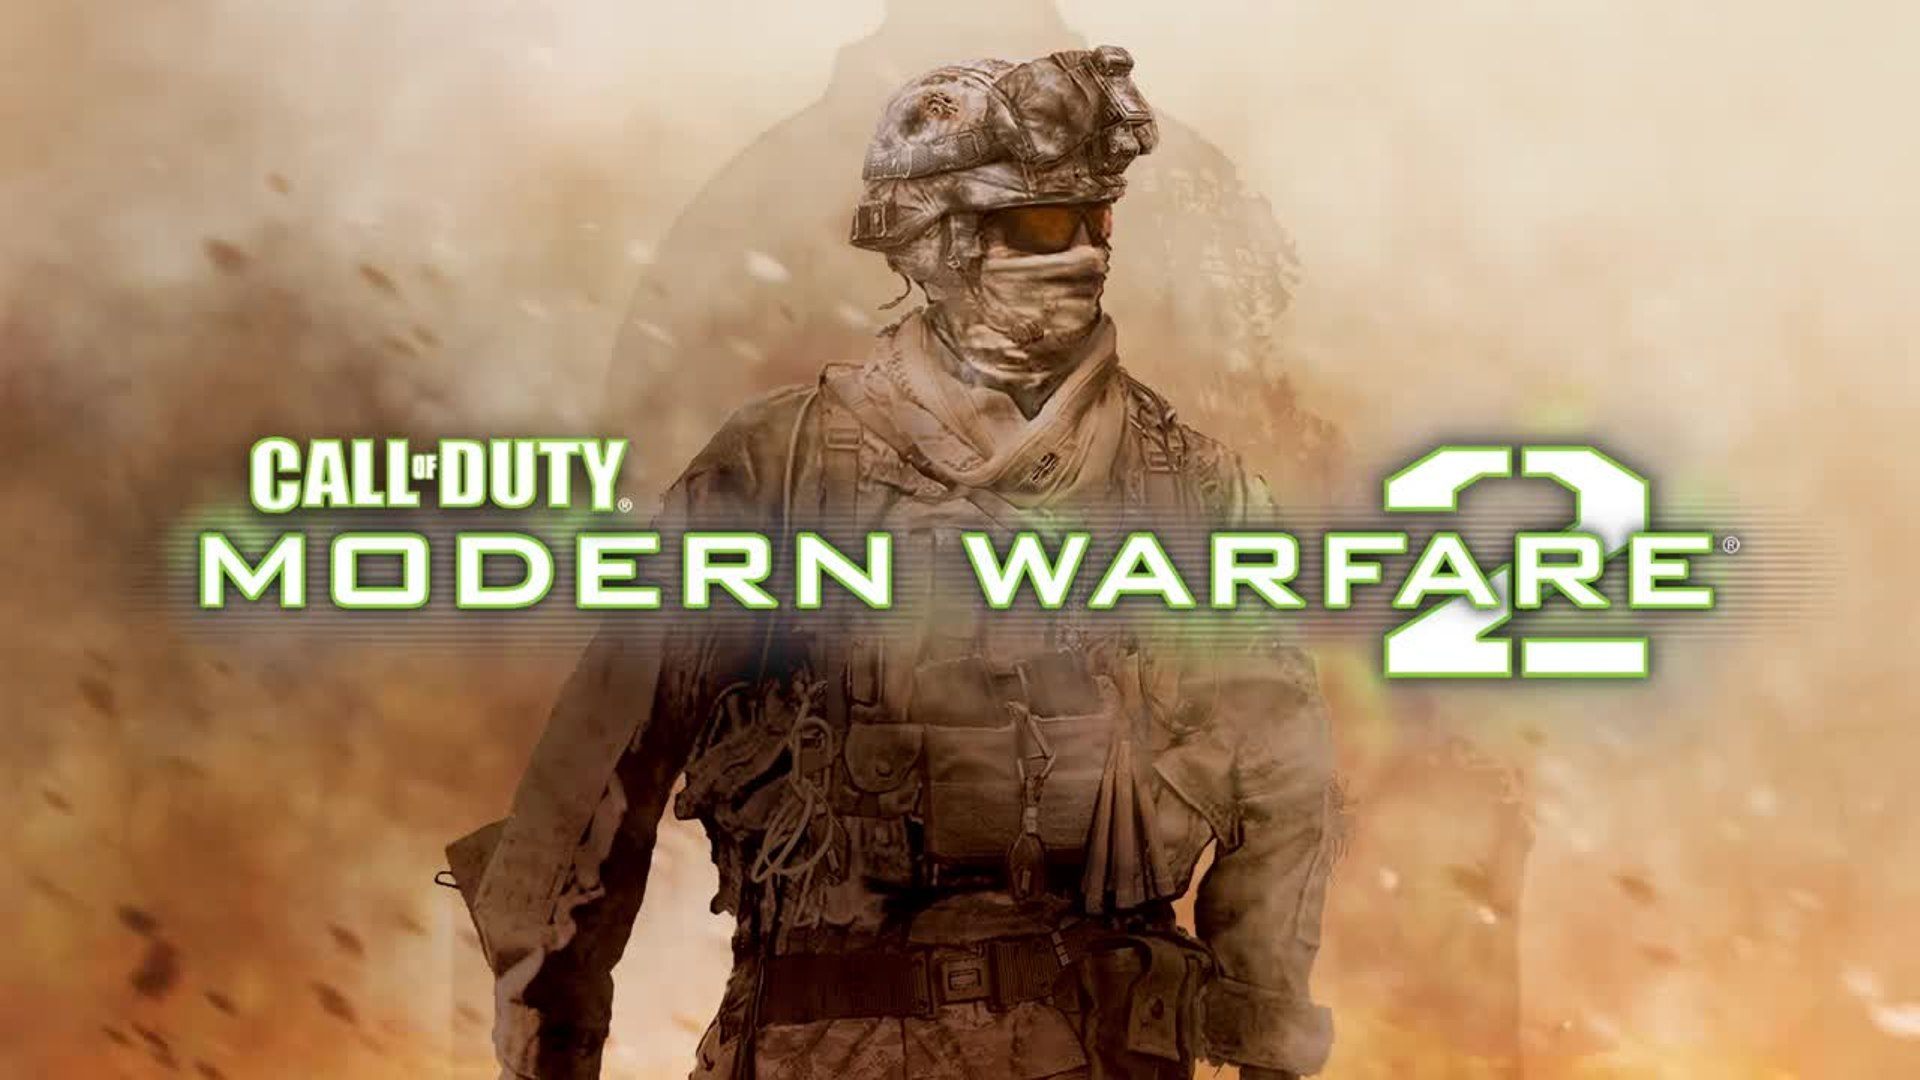 Call Of Duty 2022 is called Modern Warfare 2 claims latest rumour